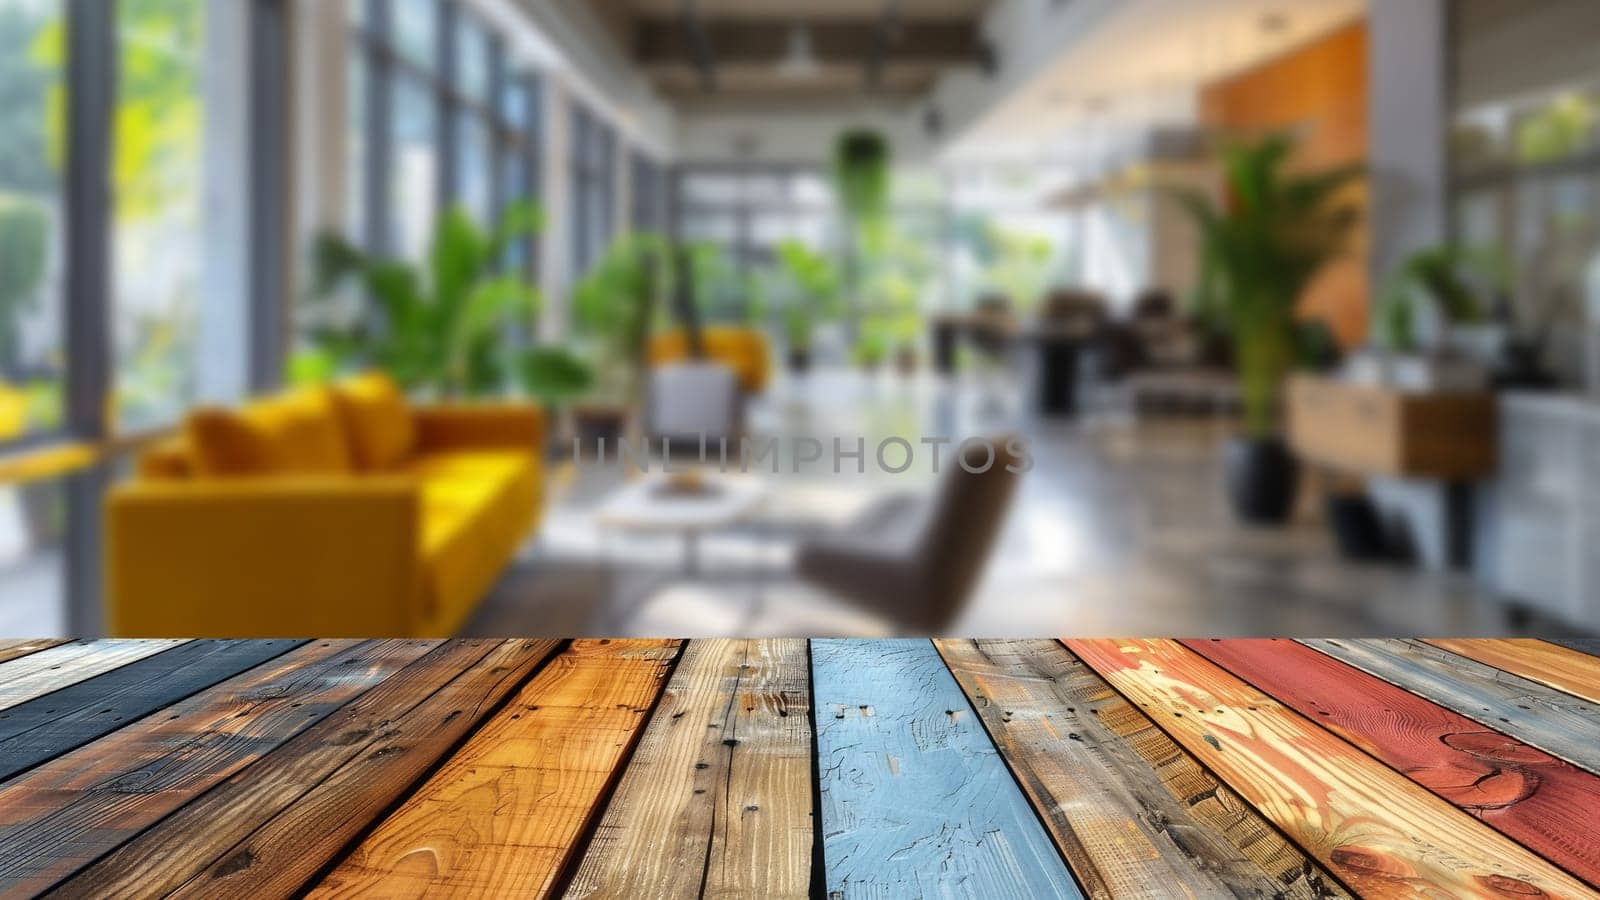 Blurred background of a contemporary office with a wooden table in the foreground, providing a space for office presentations.